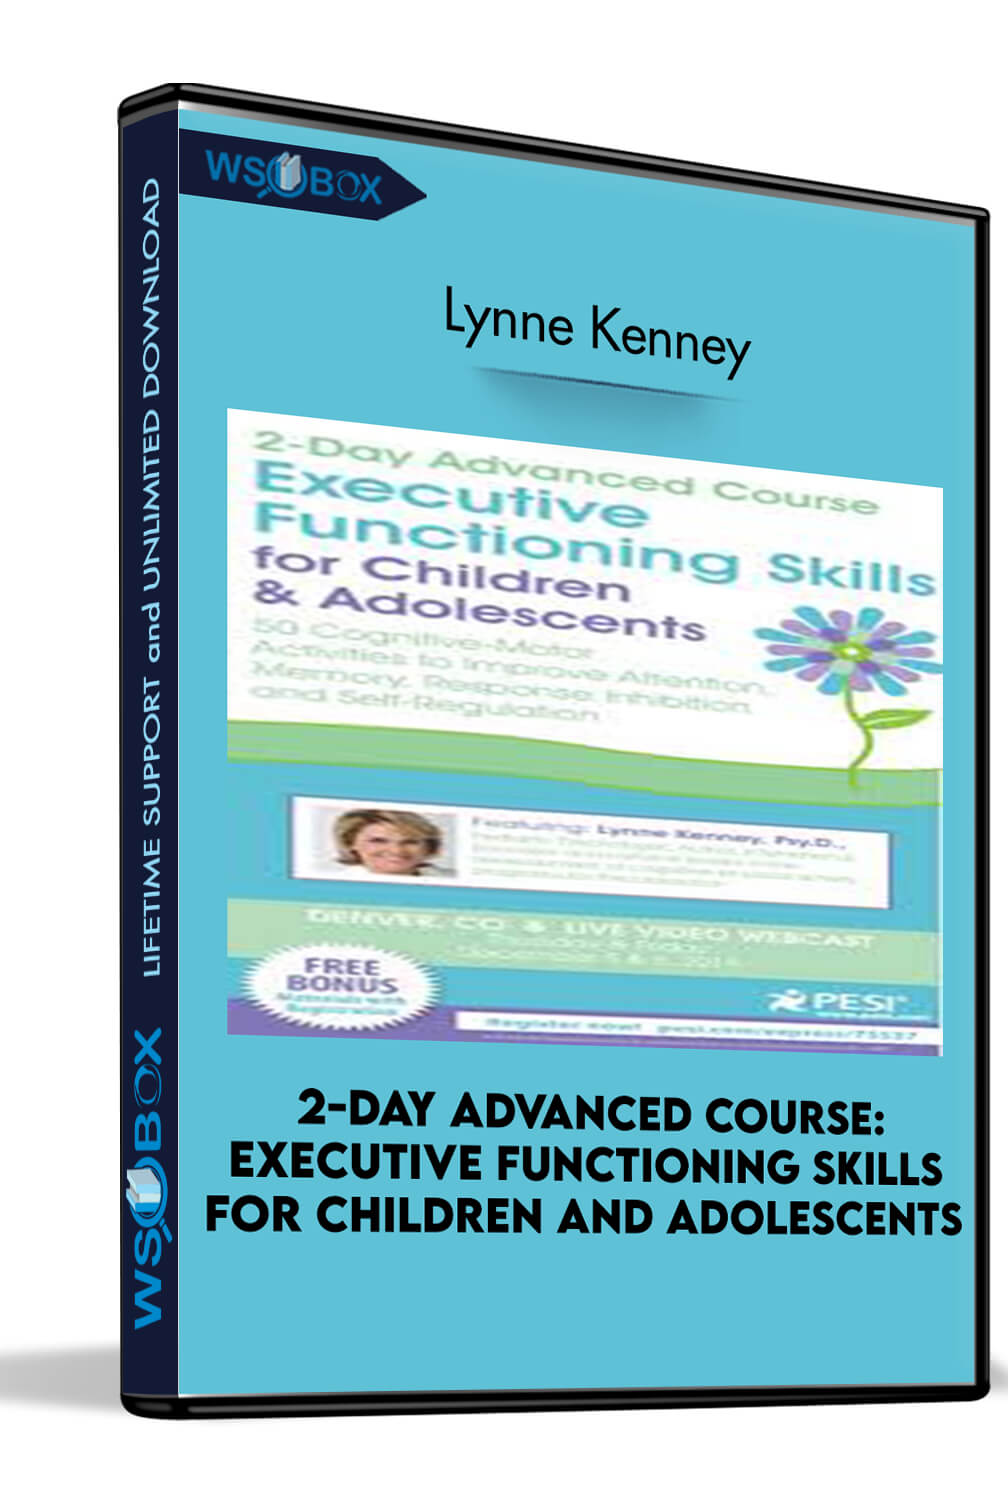 2-Day Advanced Course: Executive Functioning Skills for Children and Adolescents: 50 Cognitive-Motor Activities to Improve Attention, Memory, Response Inhibition and Self-Regulation - Lynne Kenney